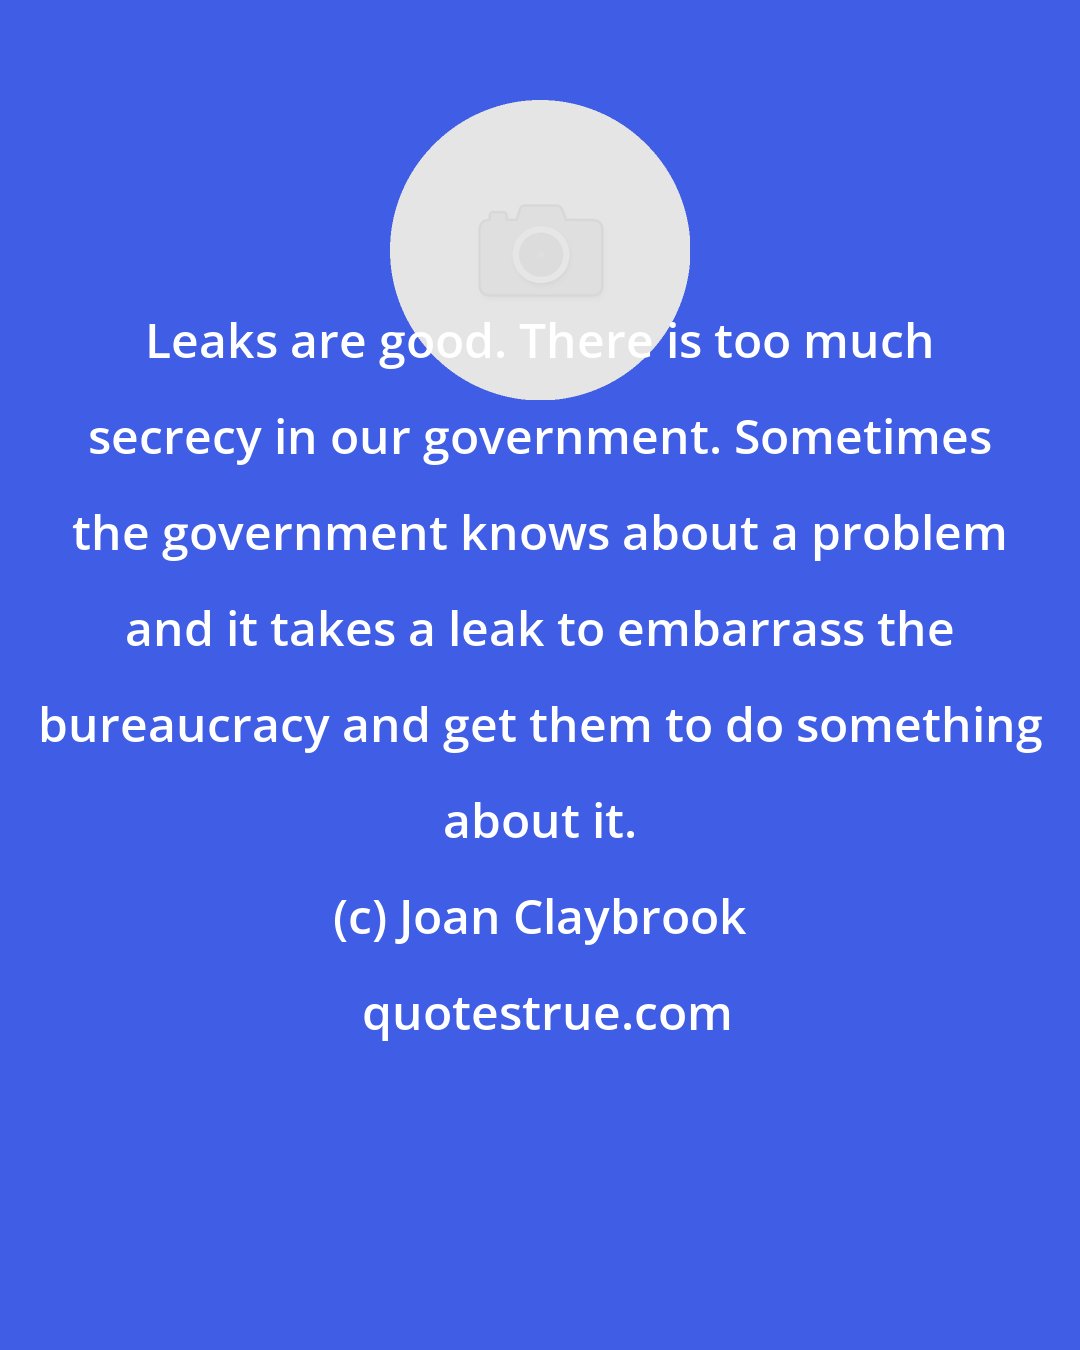 Joan Claybrook: Leaks are good. There is too much secrecy in our government. Sometimes the government knows about a problem and it takes a leak to embarrass the bureaucracy and get them to do something about it.